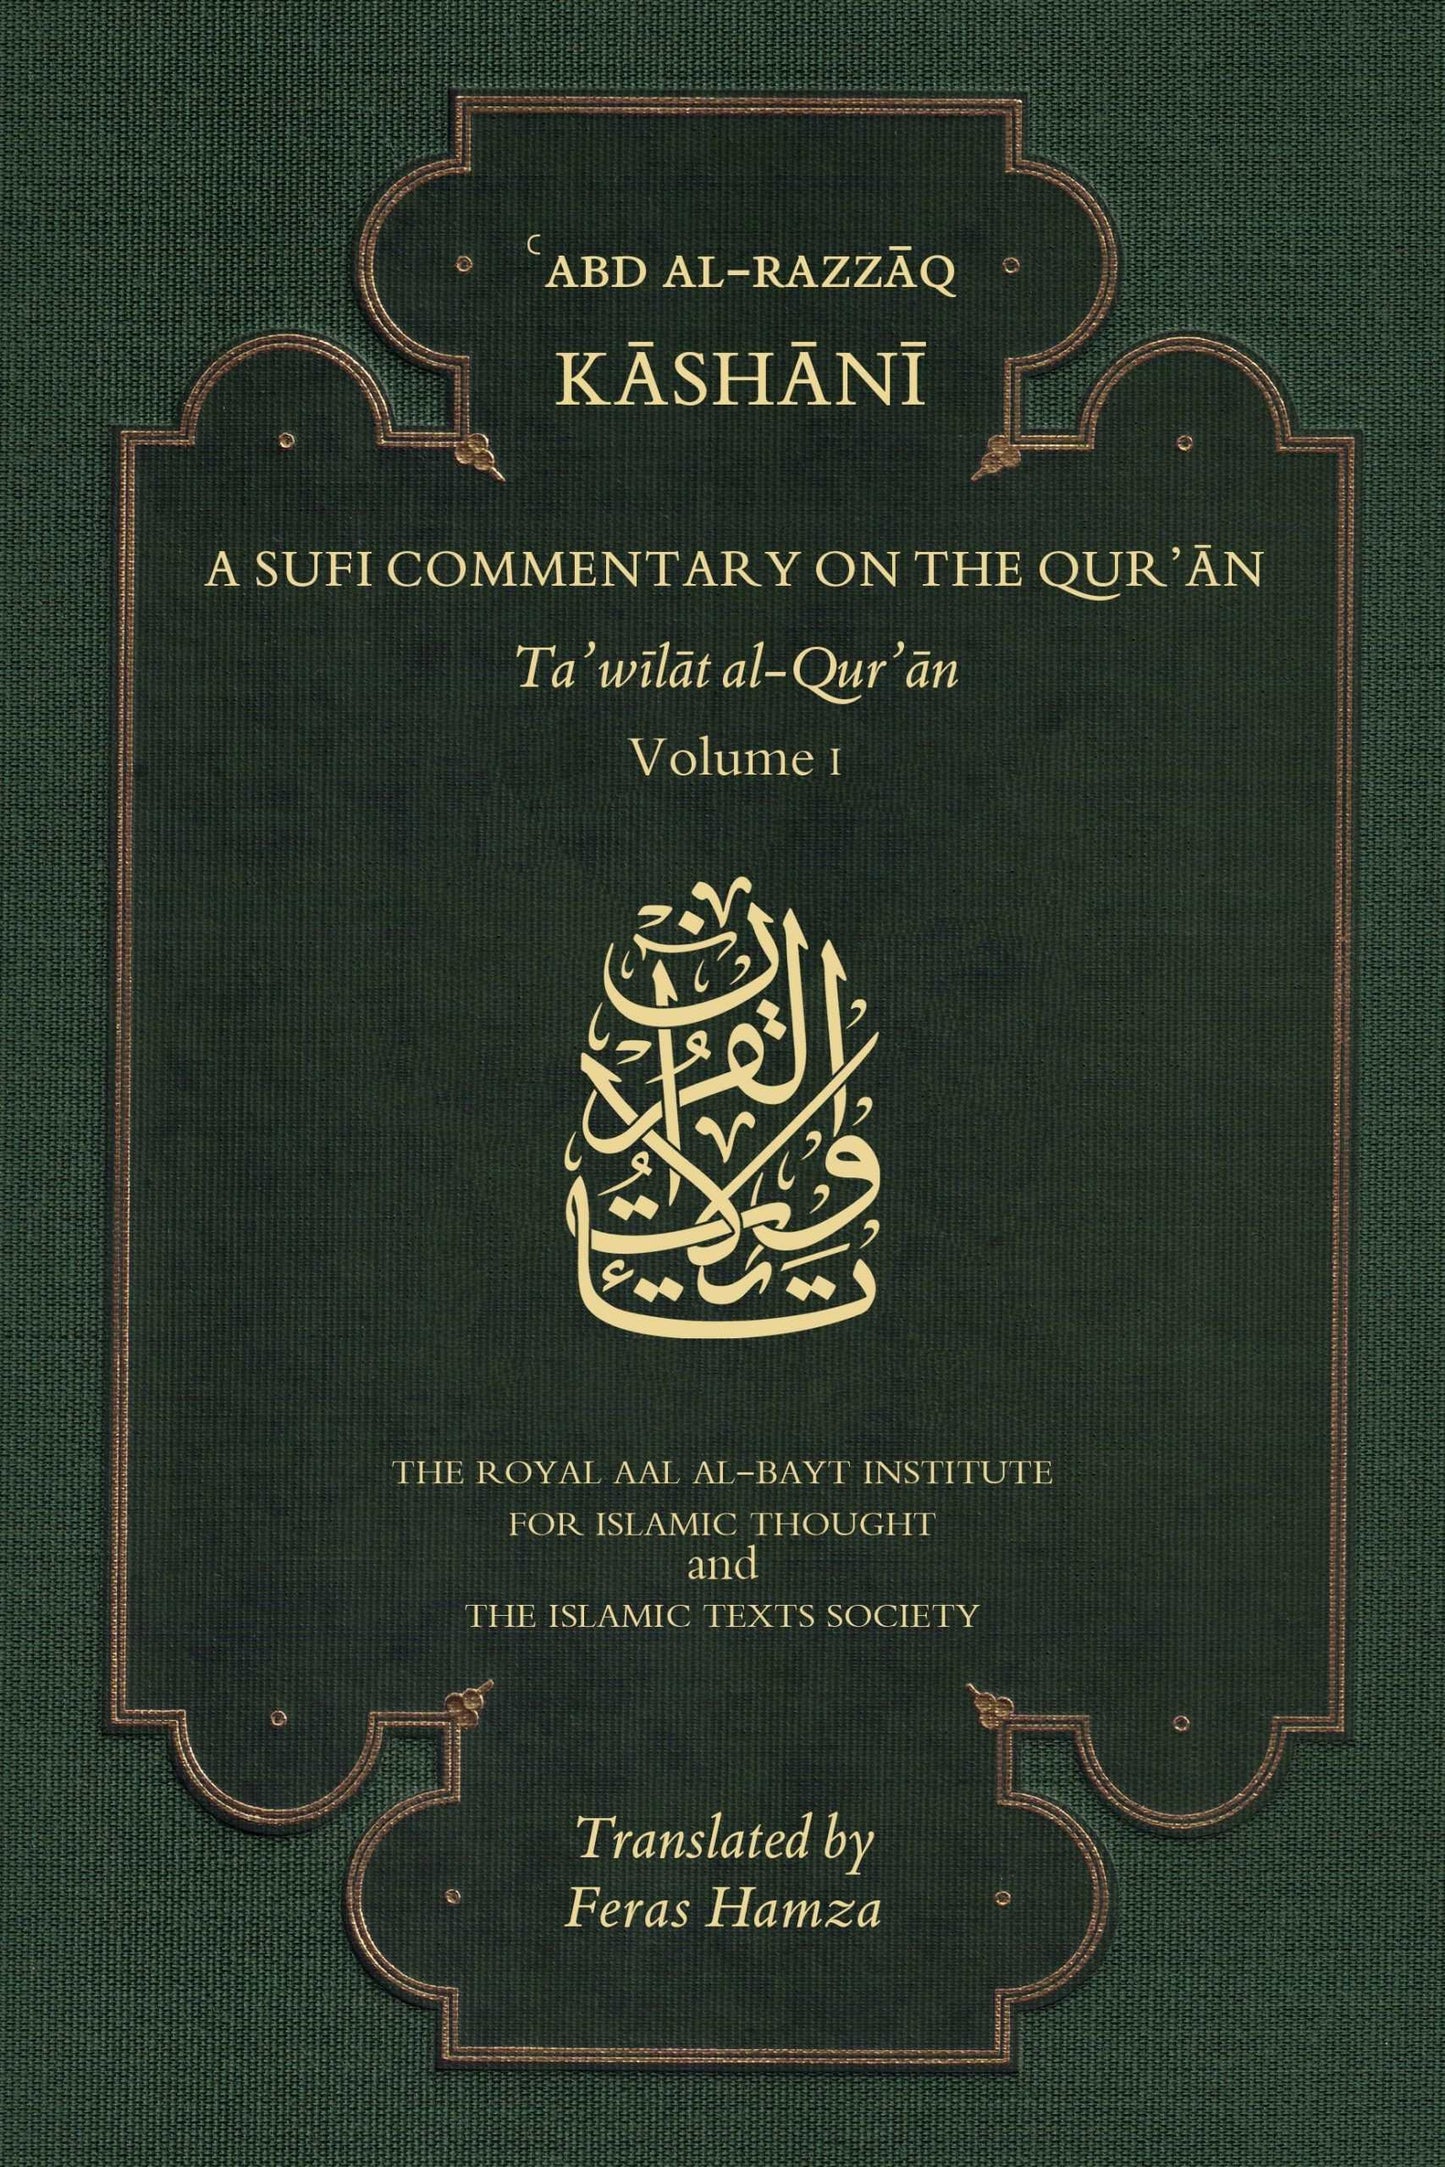 A SUFI COMMENTARY ON THE QUR’AN Volume I